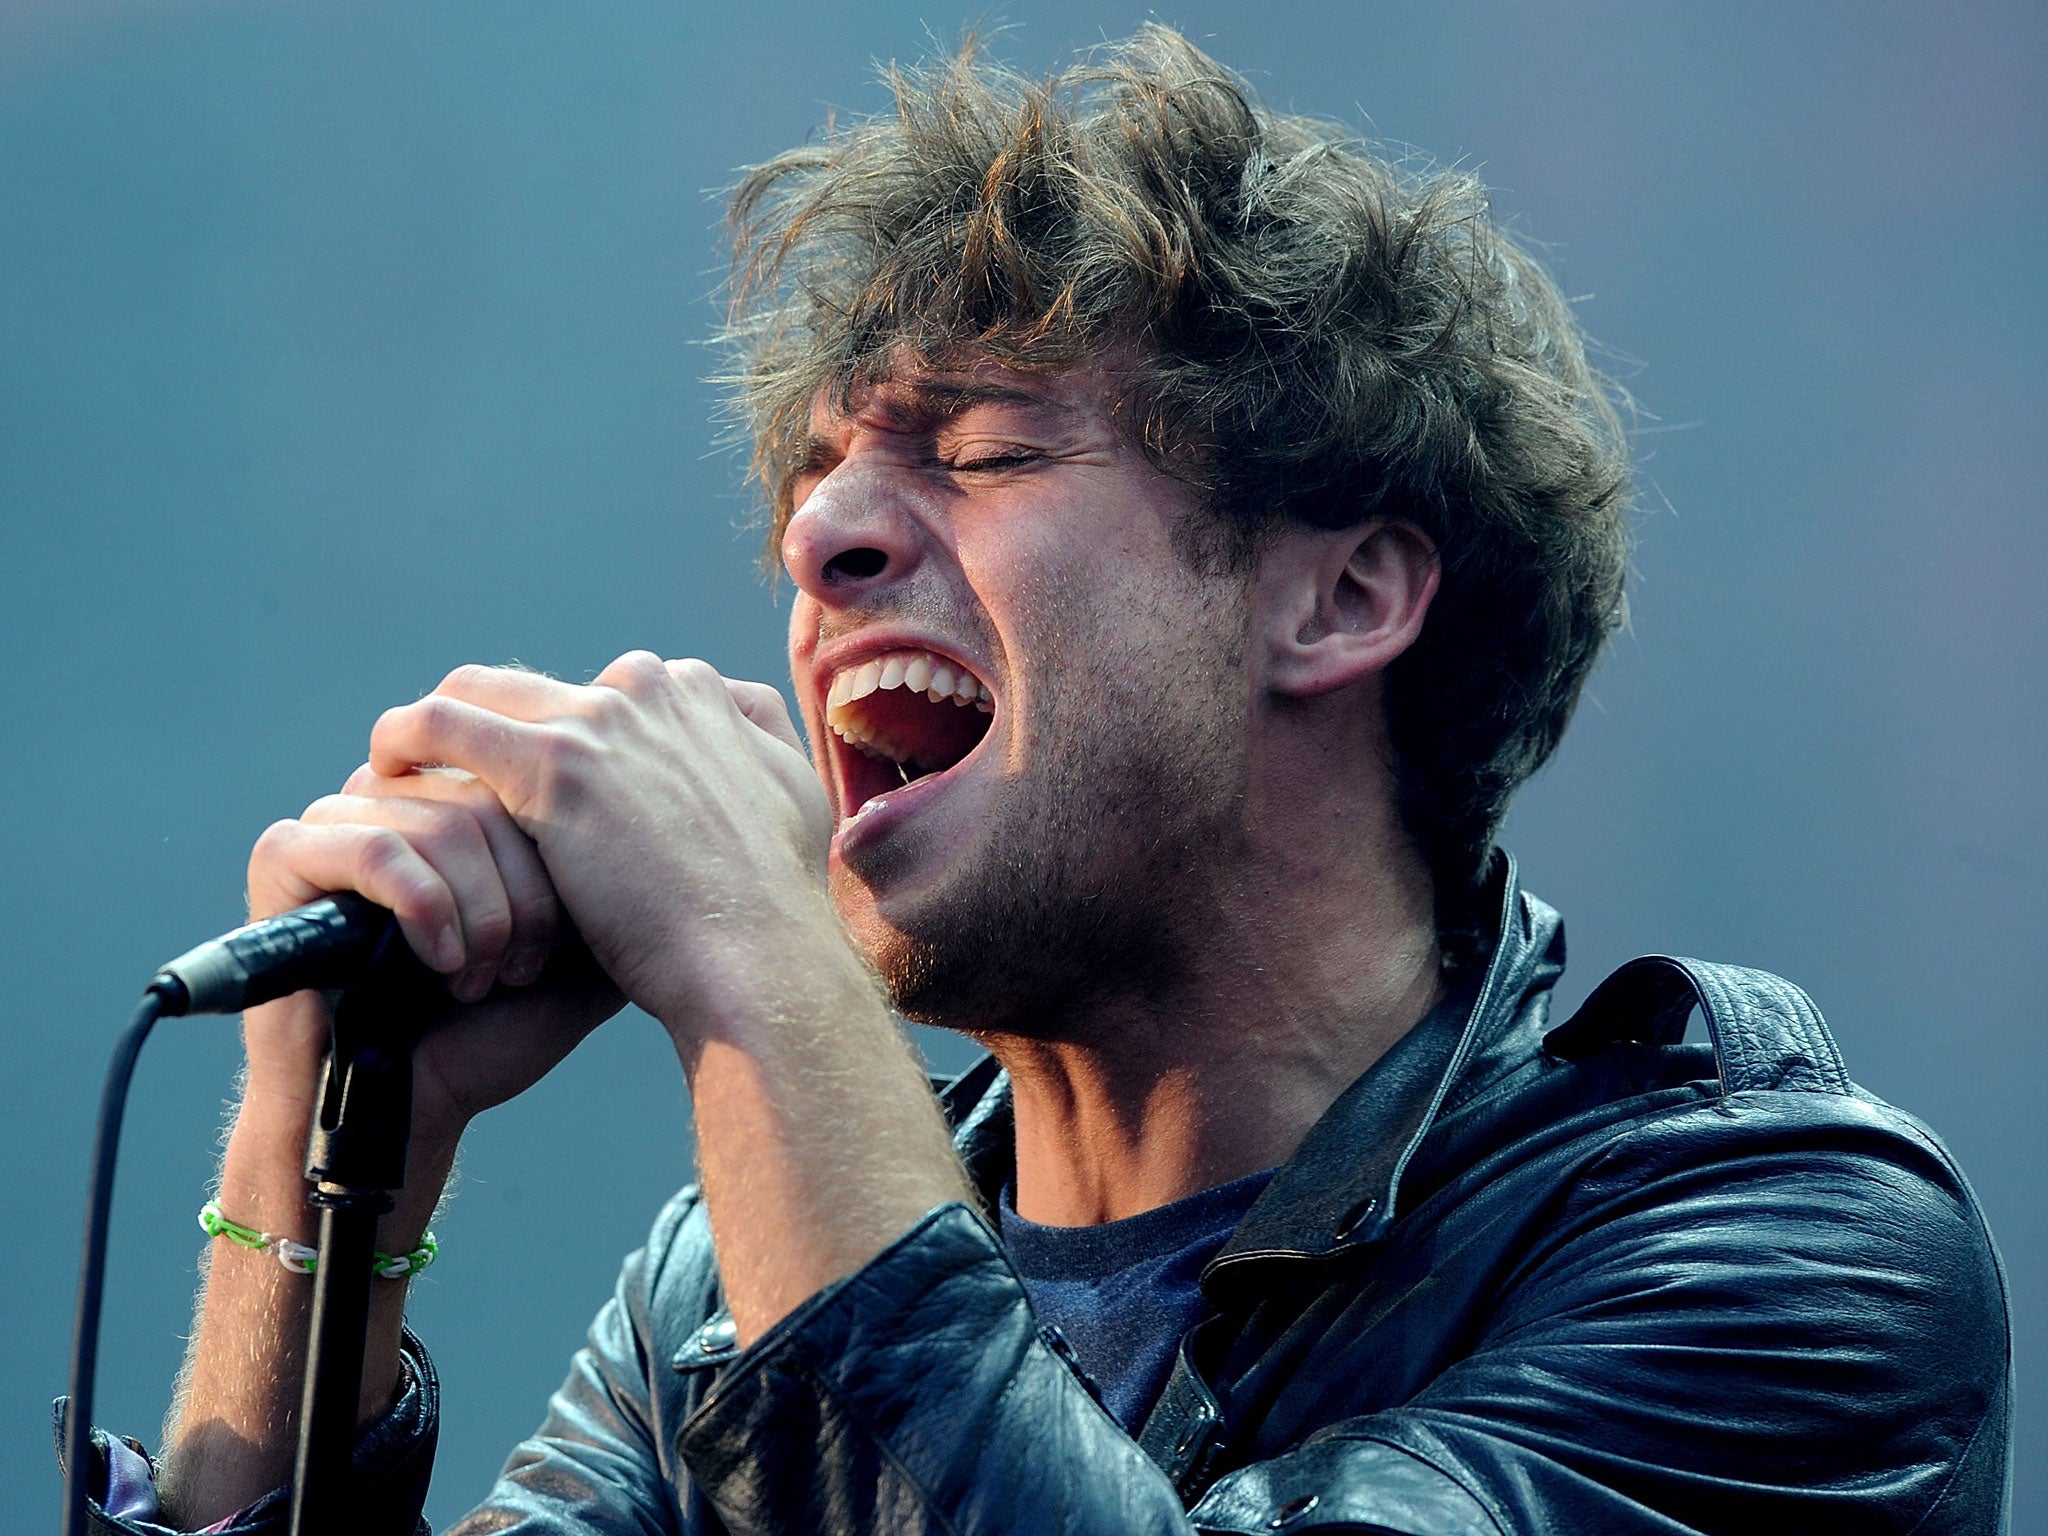 Paolo Nutini performs live at Radio 1's Big Weekend at Glasgow Green on 25 May, 2014, in Glasgow, Scotland